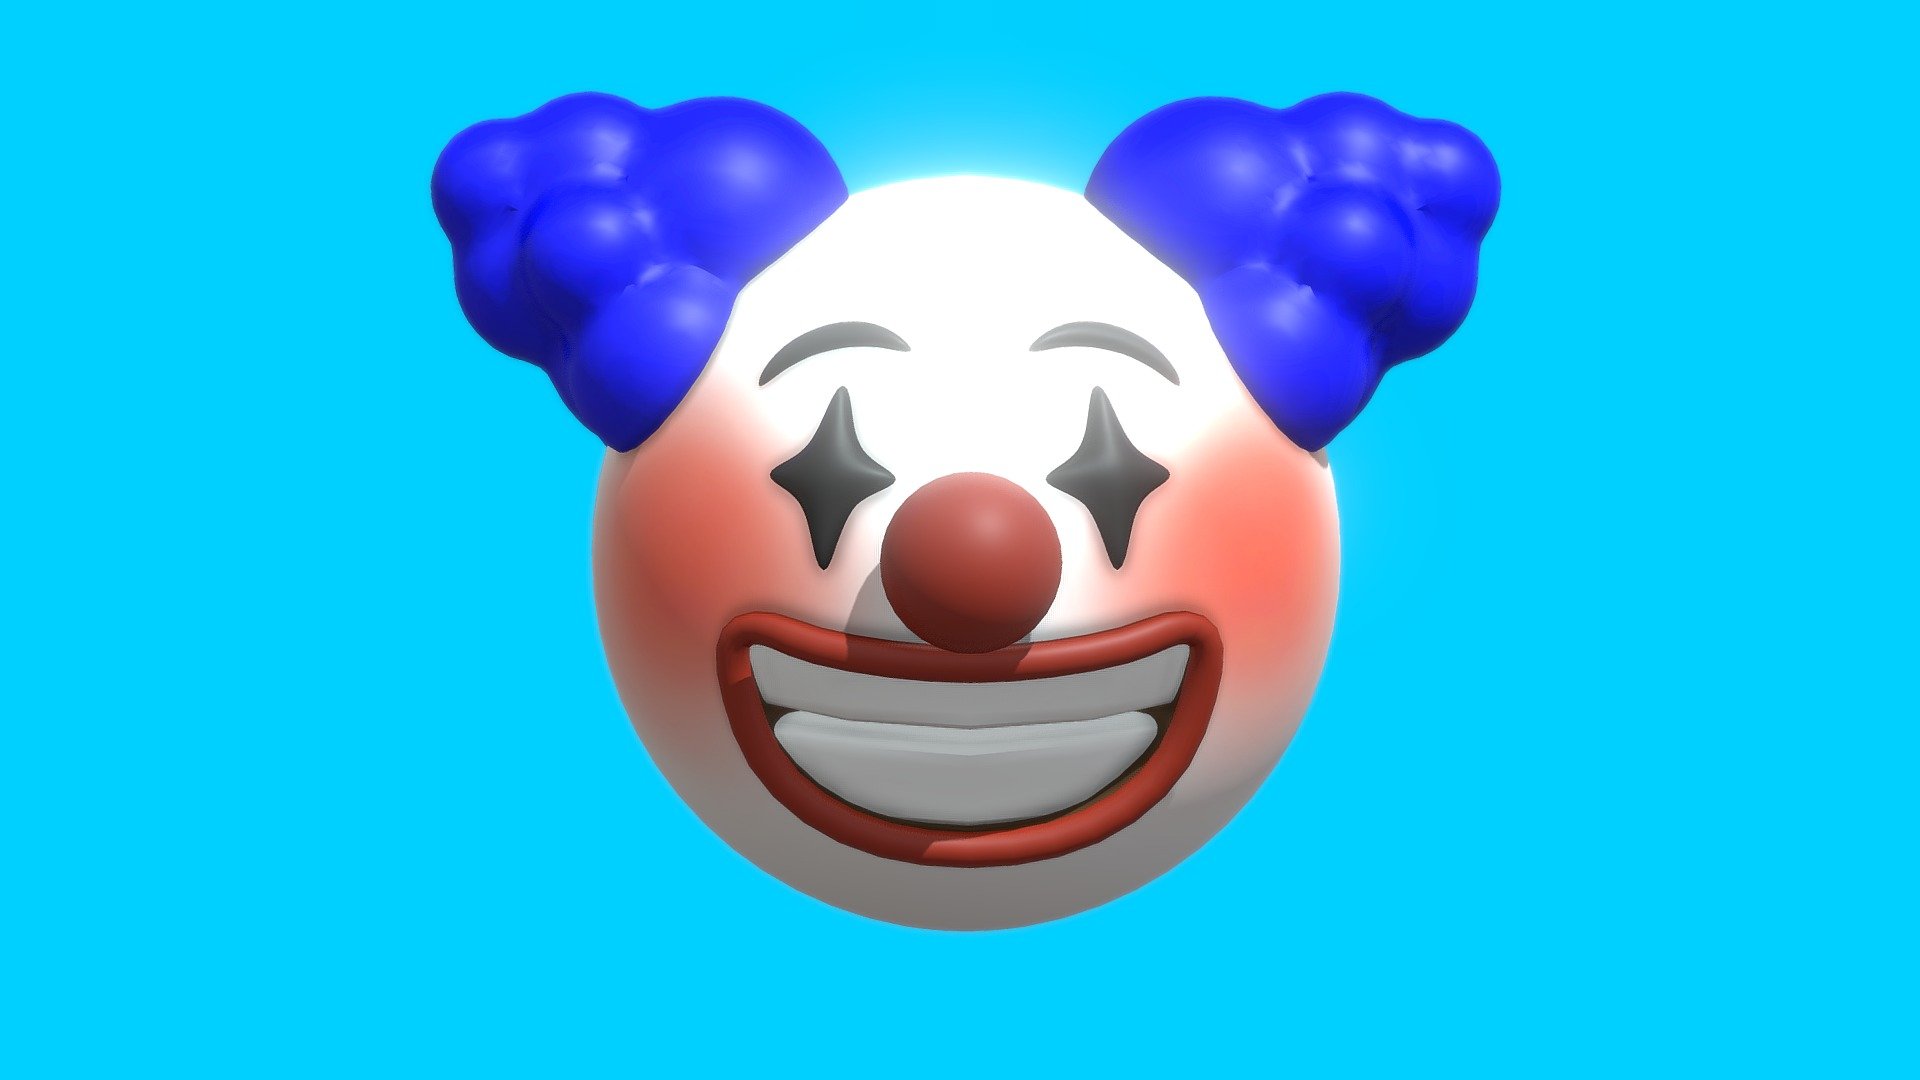 Clown Circus Emoticon Emoji or Smiley 3D Model Made in Blender 4.0

This model does include a TEXTURE, DIFFUSE, and ROUGHNESS MAP, and Exported Extension FBX, OBJ, DAE, GLTF and STL format but if you want to change the color you can change it in the blend file, just use the principled bsdf and play with the rough and base color parameter

in the blender file i just included the Model with the Subdivide Modifier and Base Material but Different UV Map - Clown Circus Emoticon Emoji or Smiley - Buy Royalty Free 3D model by pakyucangkun 3d model